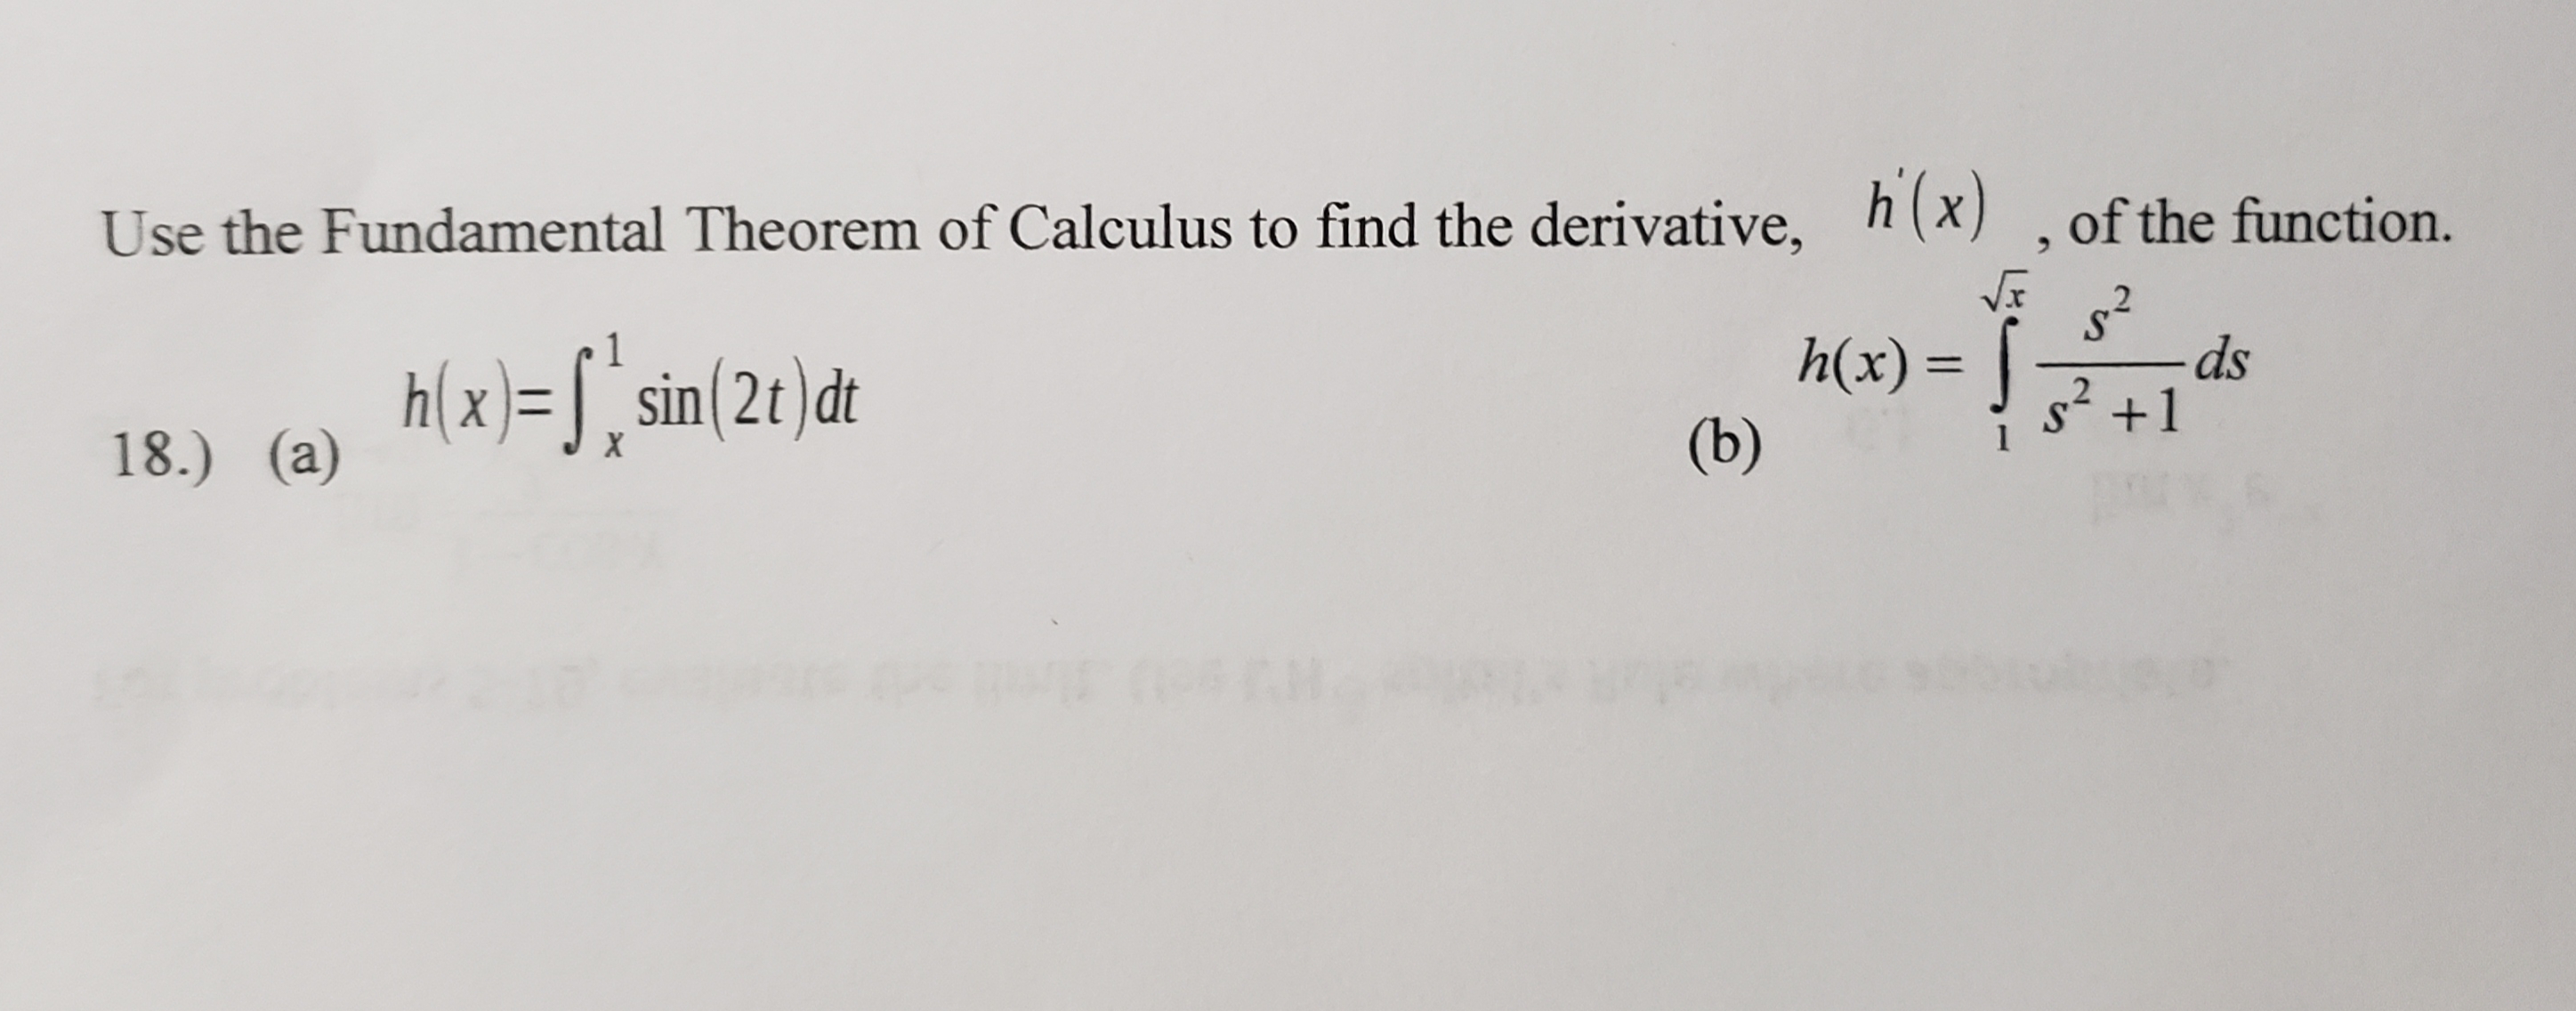 Use the Fundamental Theorem of Calculus to find the derivative, h(x) , of the function.
h(x)= S, sin(2t)dt
18.) (a)
s²
ds
h(x) = |
s' +1
(b)
